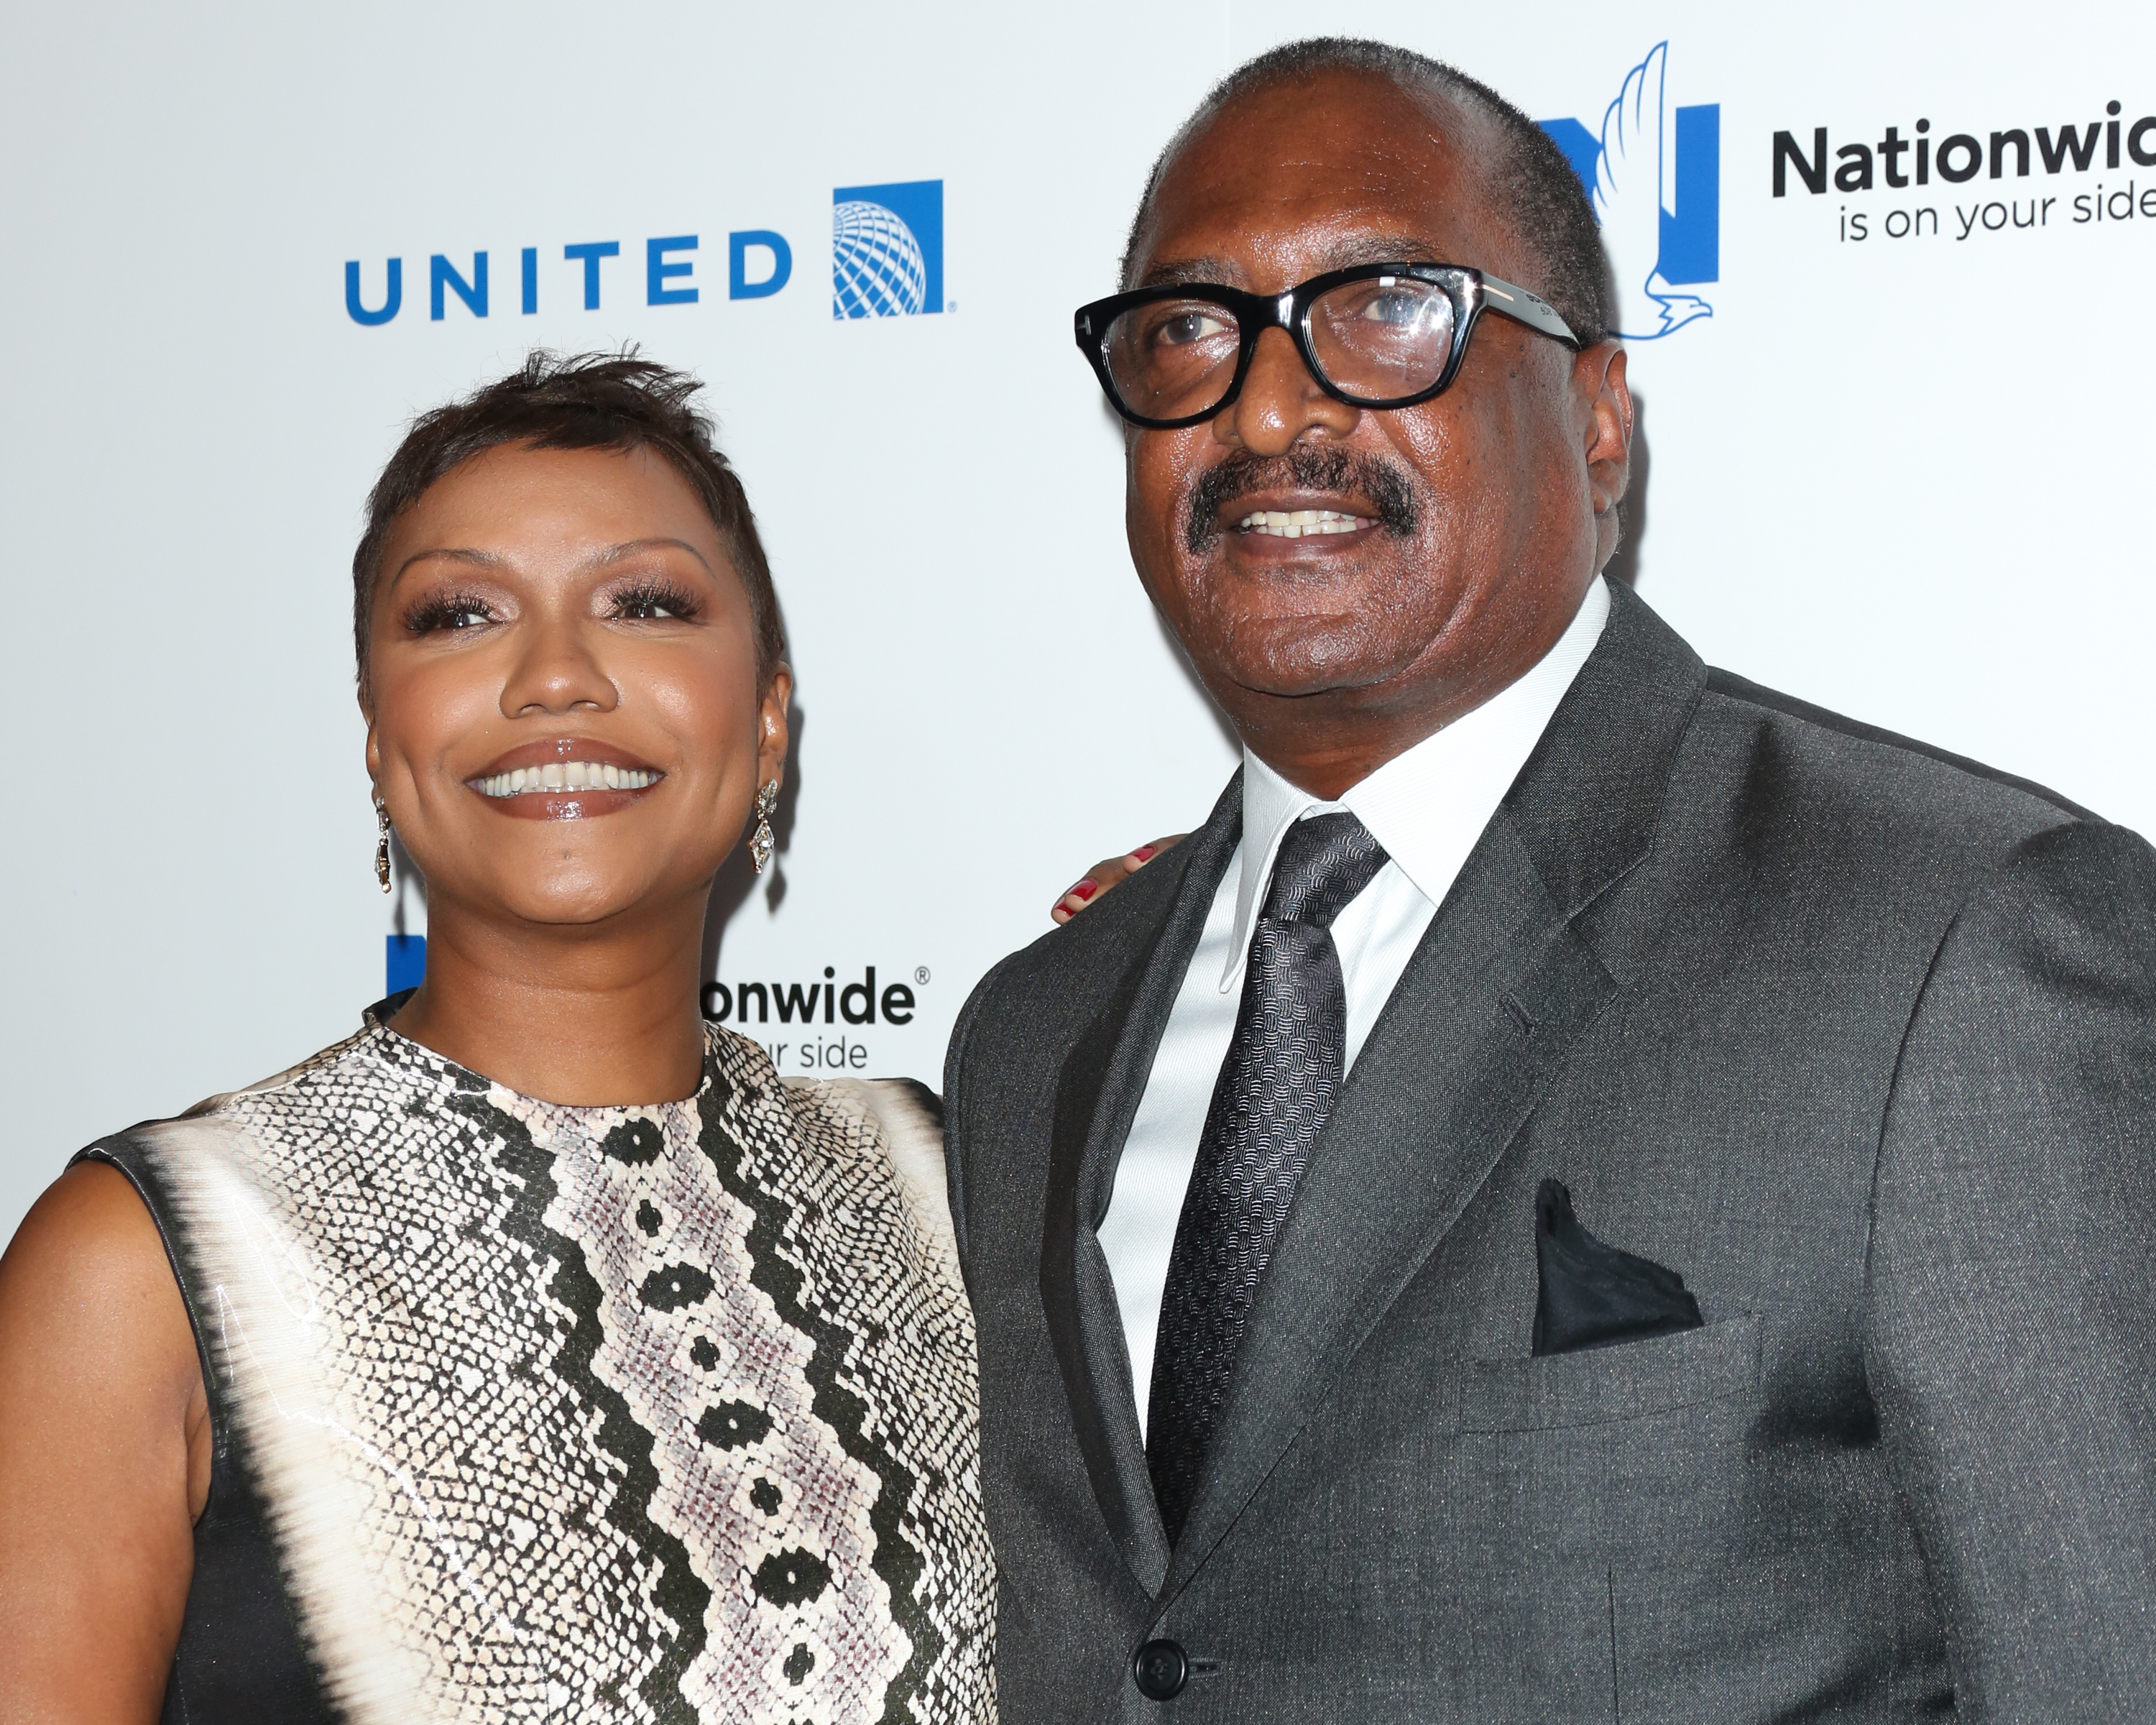 Old & CoupledUp Mathew Knowles And Wife Gena Avery Have A Romantic